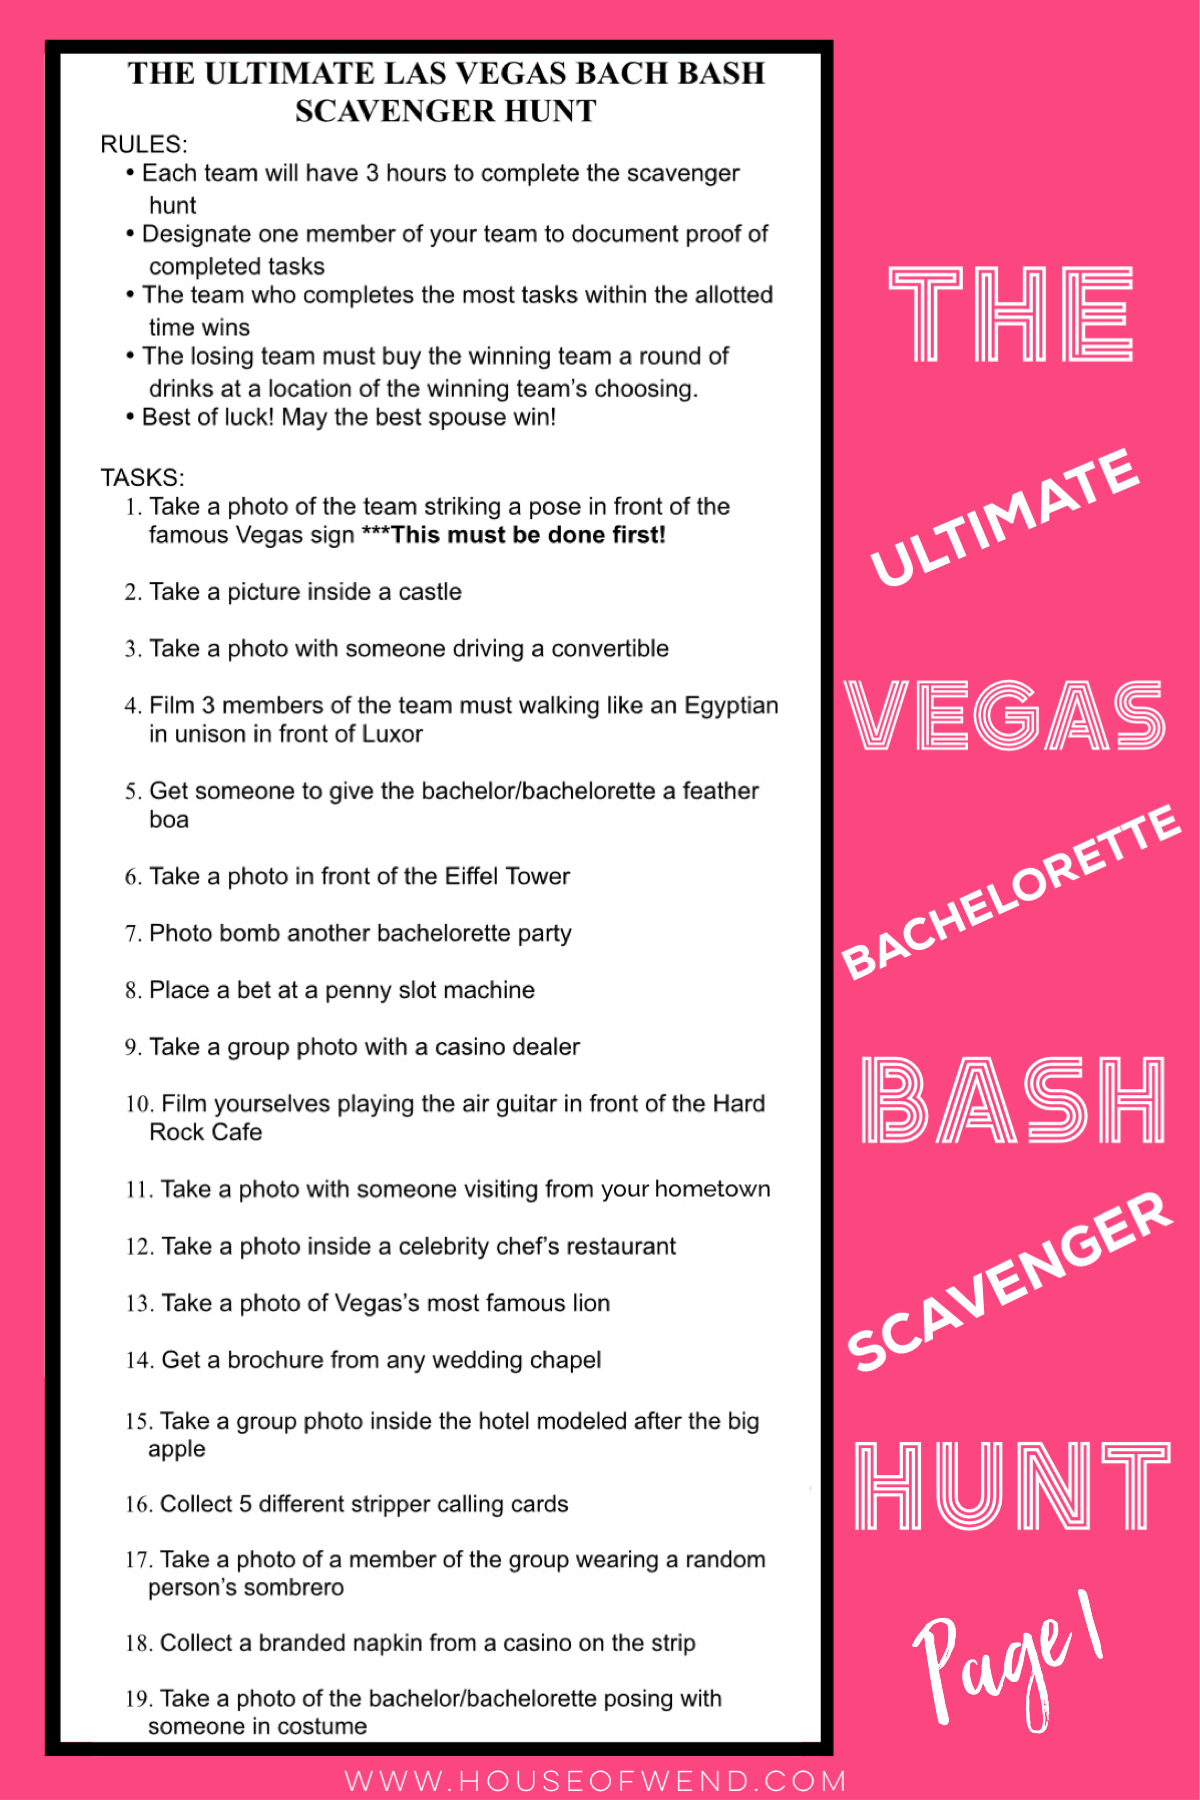 TIPS FOR PLANNING THE ULTIMATE BACHELORETTE PARTY IN VEGAS